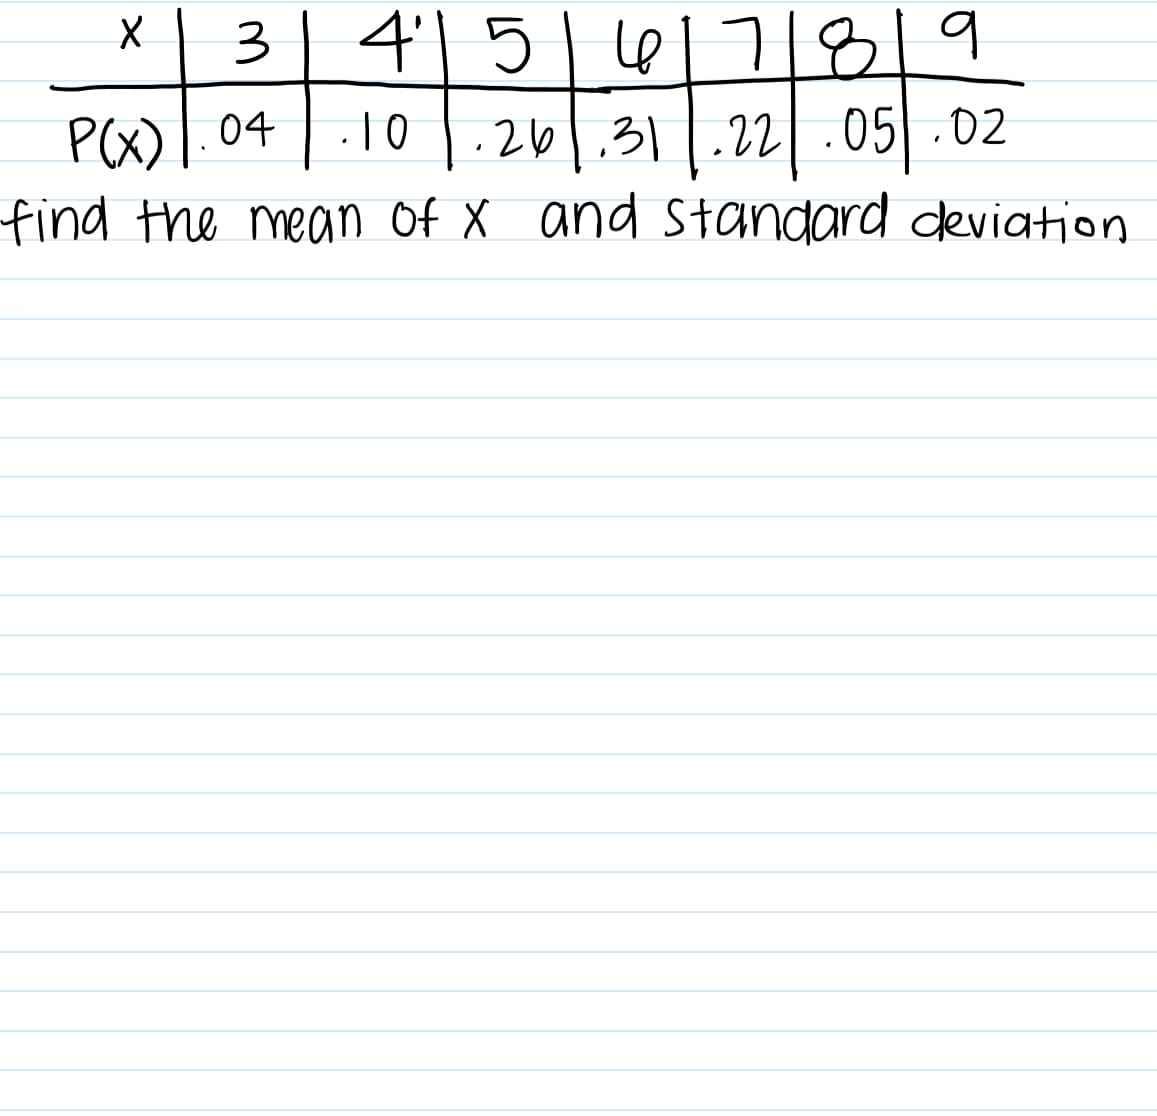 3.
4| 5|6171819
P(X) |.04
find the mean Of X and standard deviation
26,311.221 .05 .02
